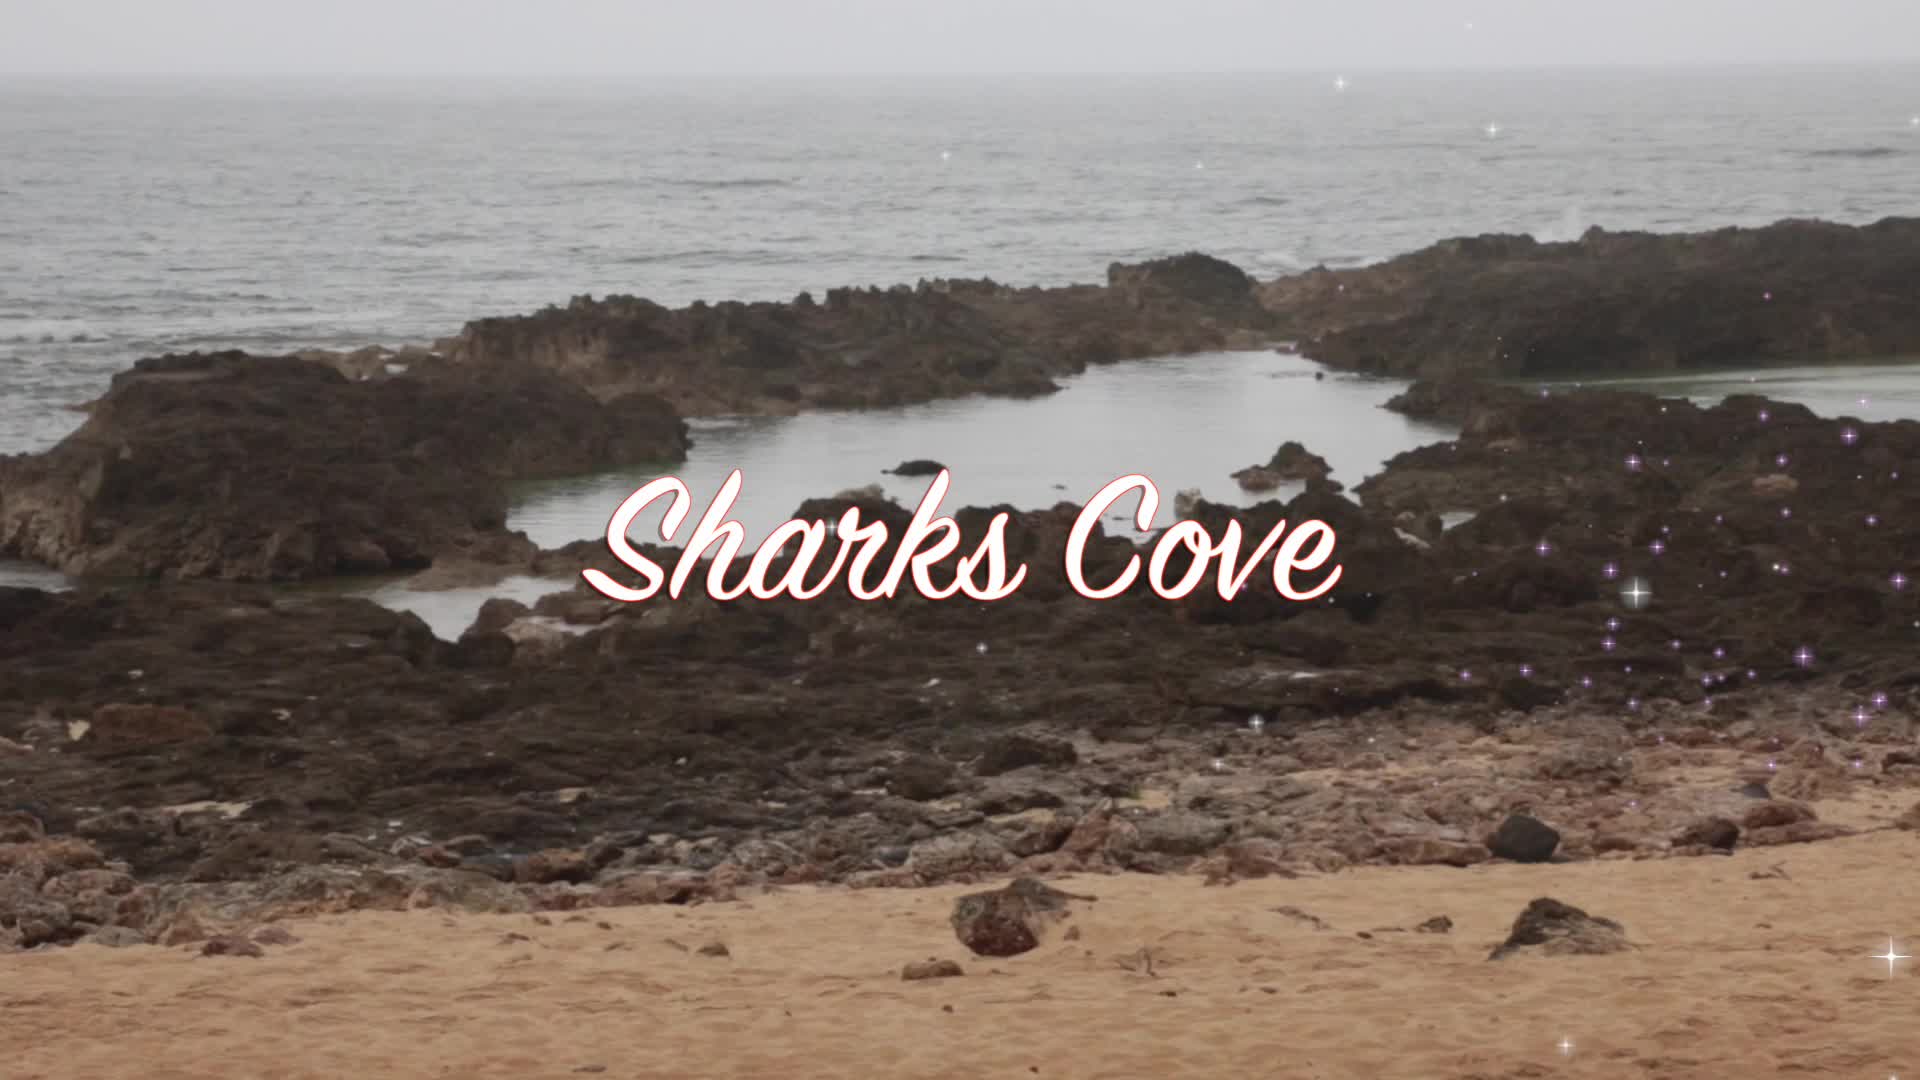 Shark’s Cove: Discovering the Volcanic Island